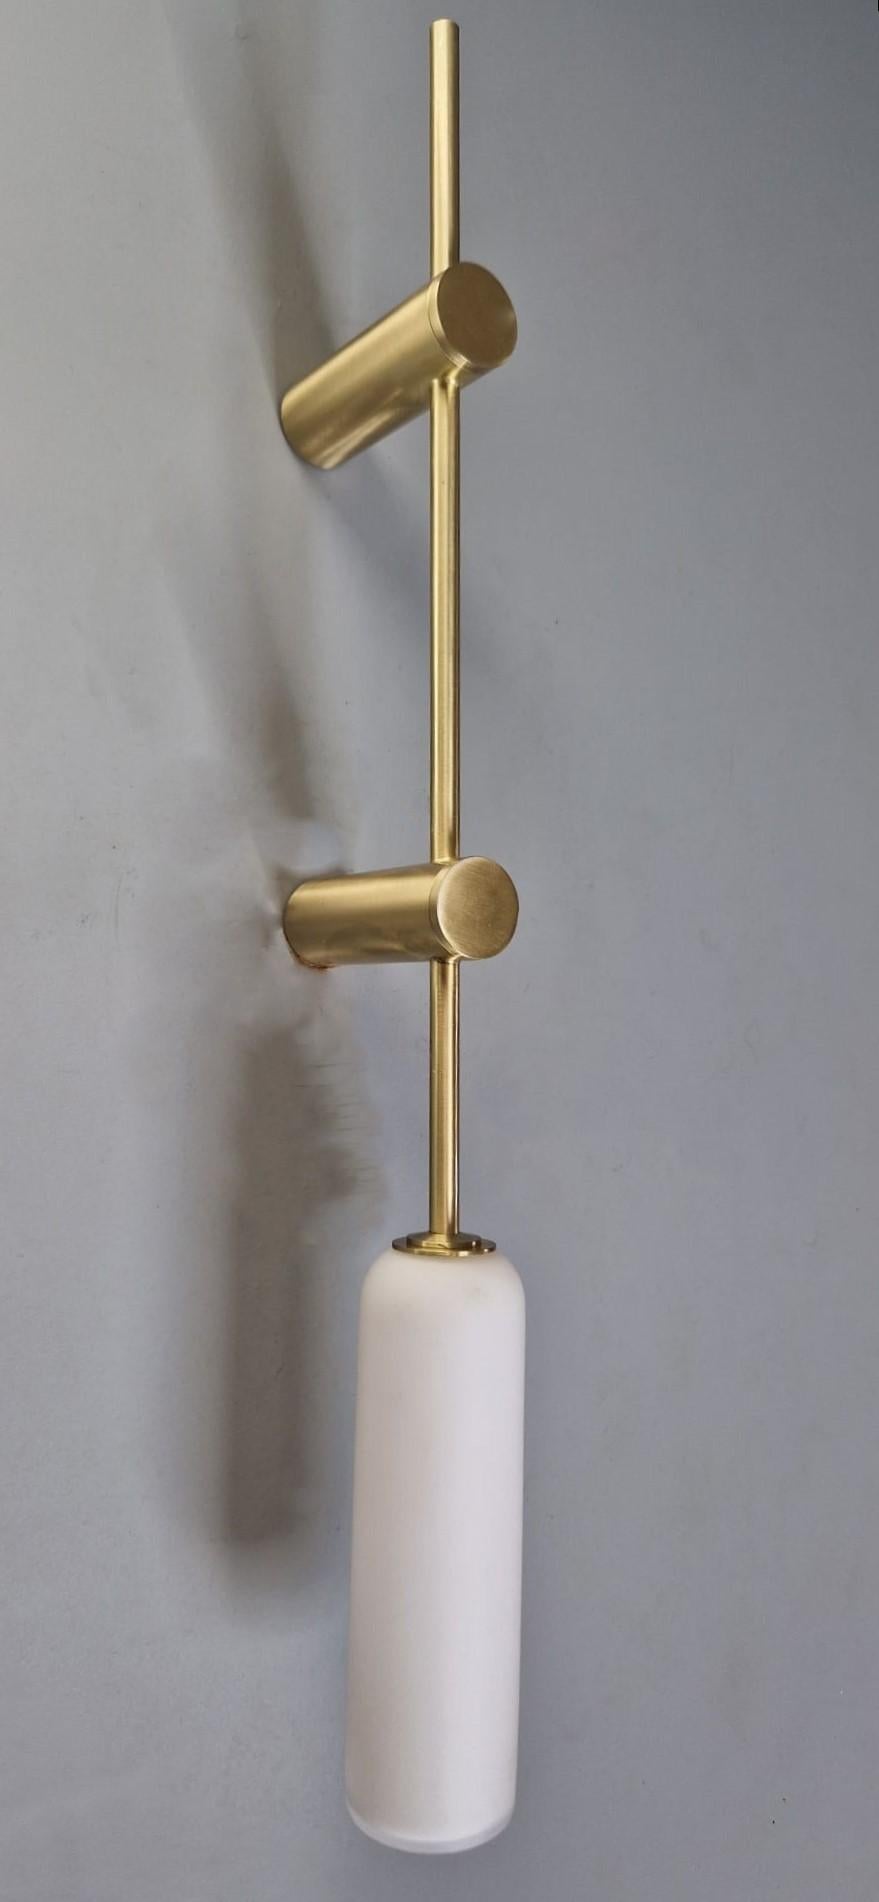 Elegantly simple, this wall light pairs light brass with frosted glass to create a delicate, subdued design.

Overall height: 550mm
Projection: 100mm
Shade Height: 170mm
Shade Diameter: 45mm

Made to order to buyer's specification. Variations to